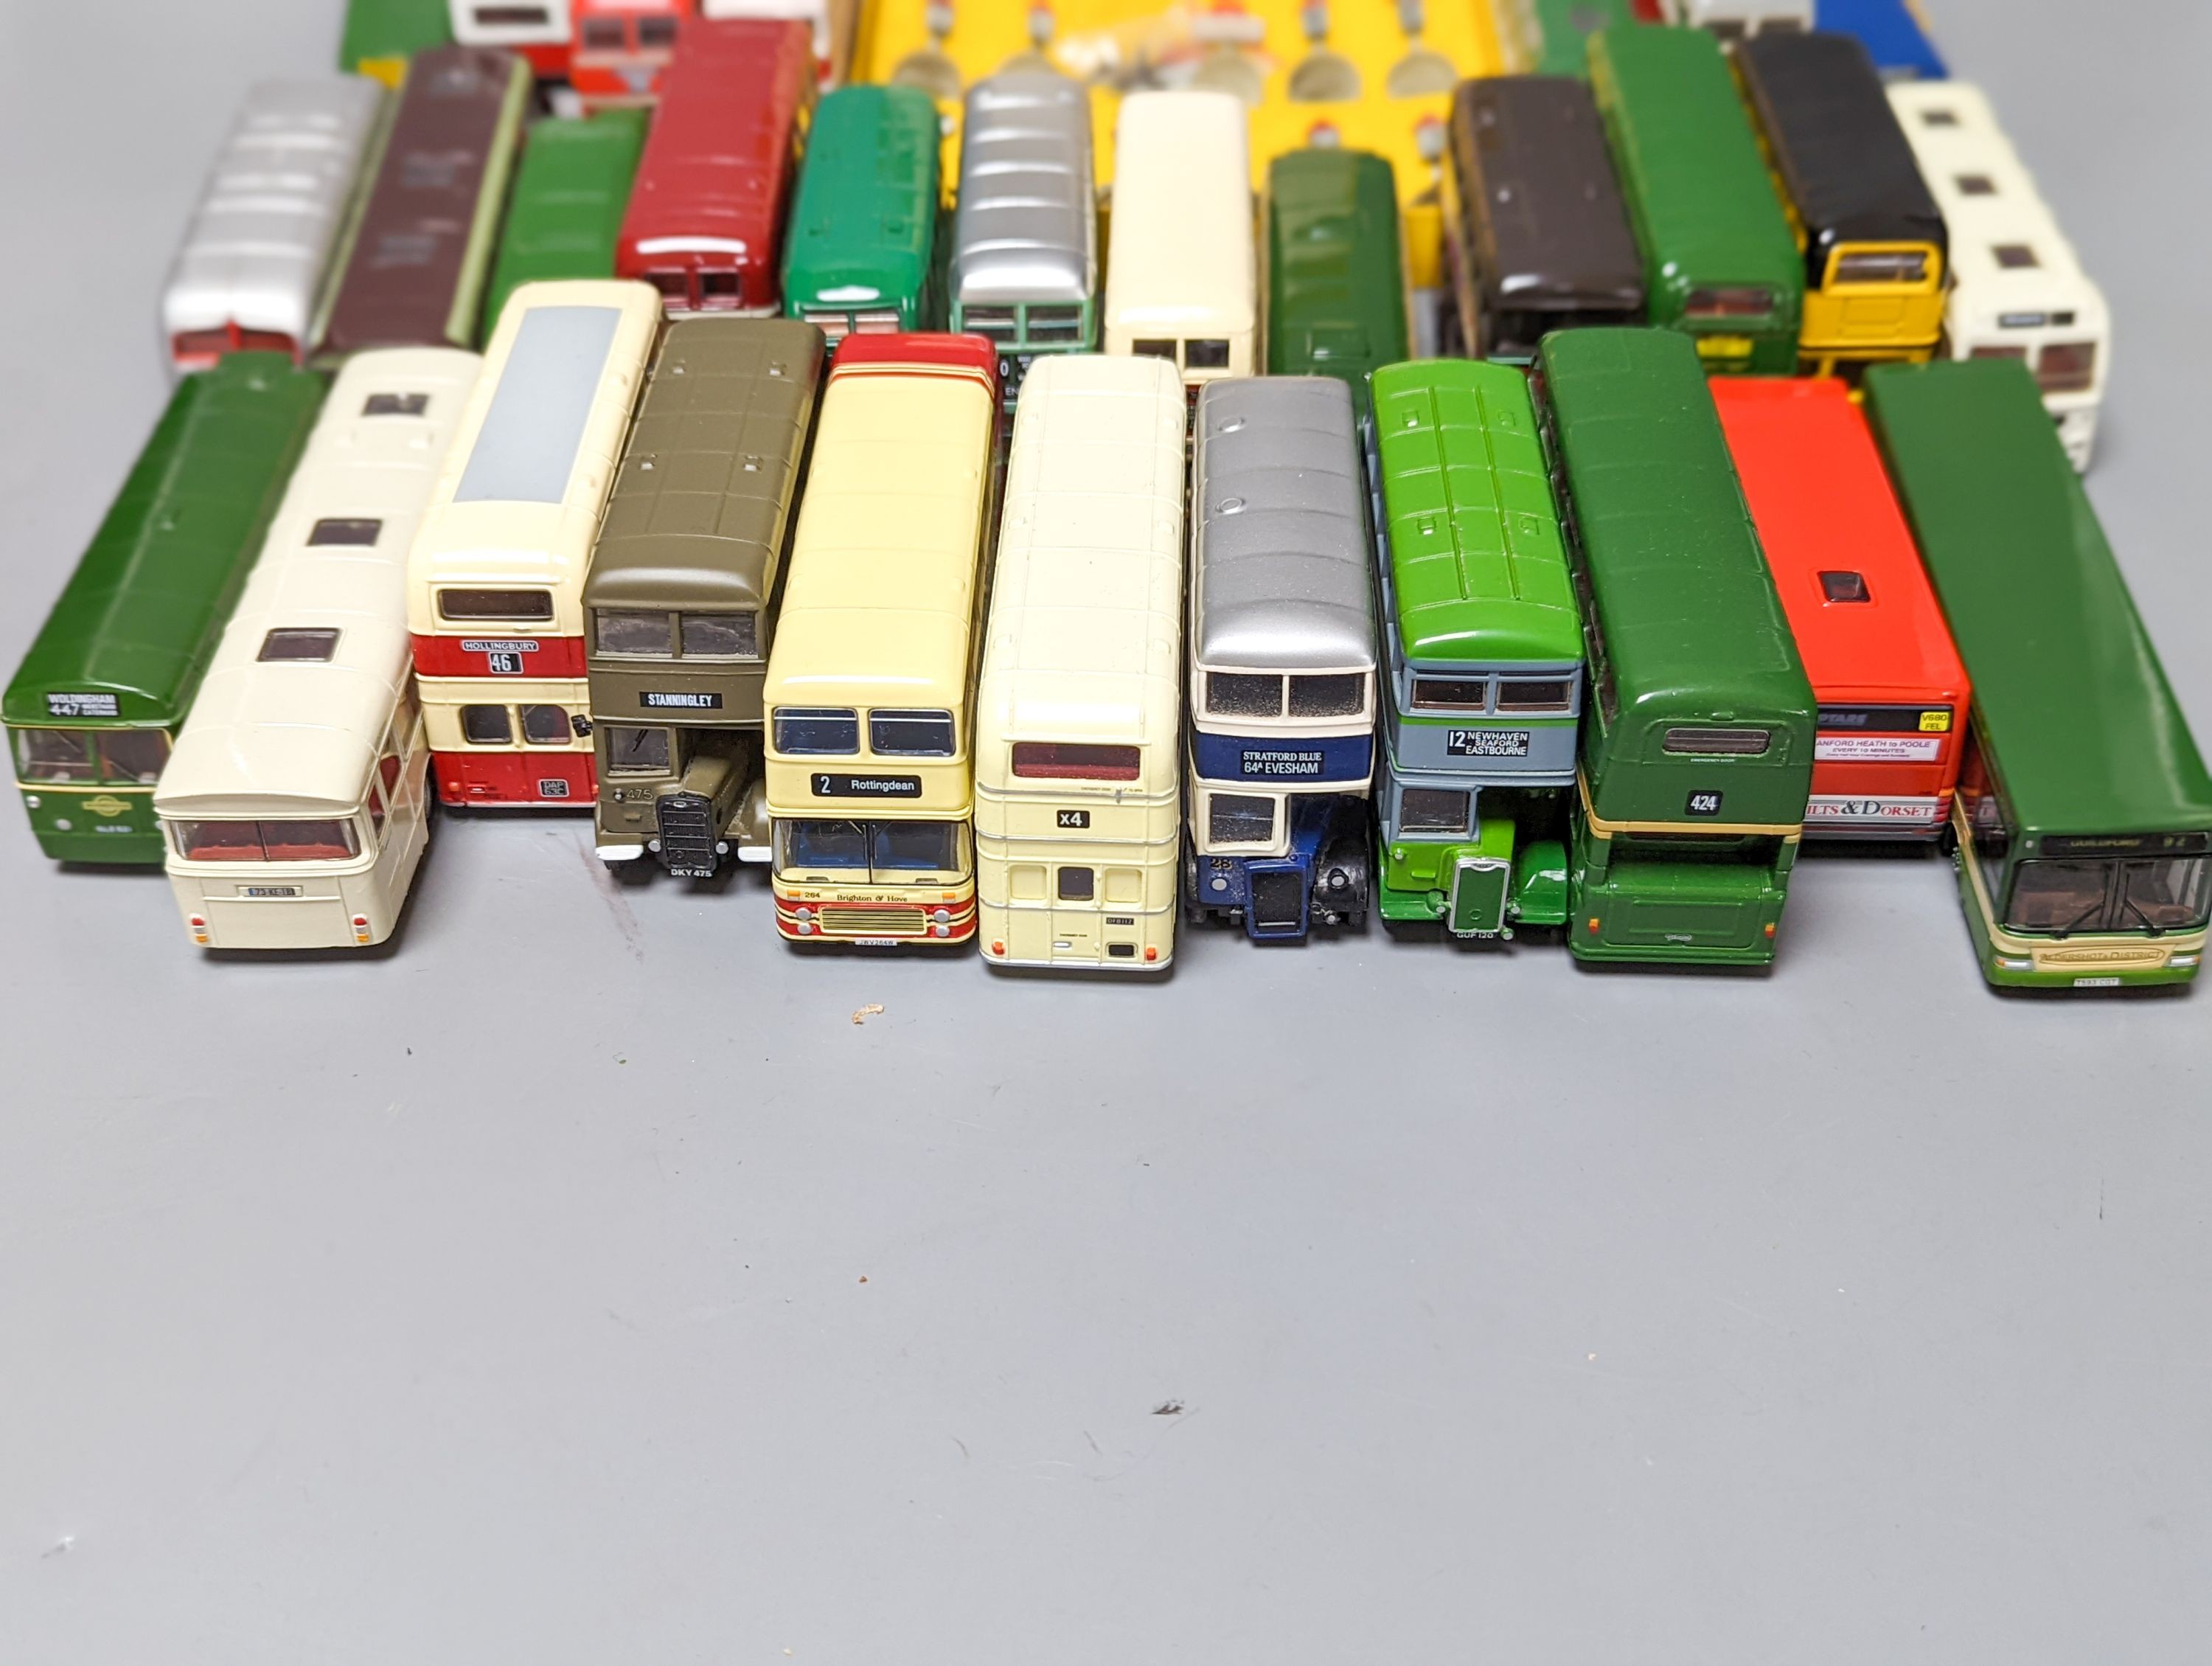 Cased Dinky road signs, Corgi and EFE model buses (29)